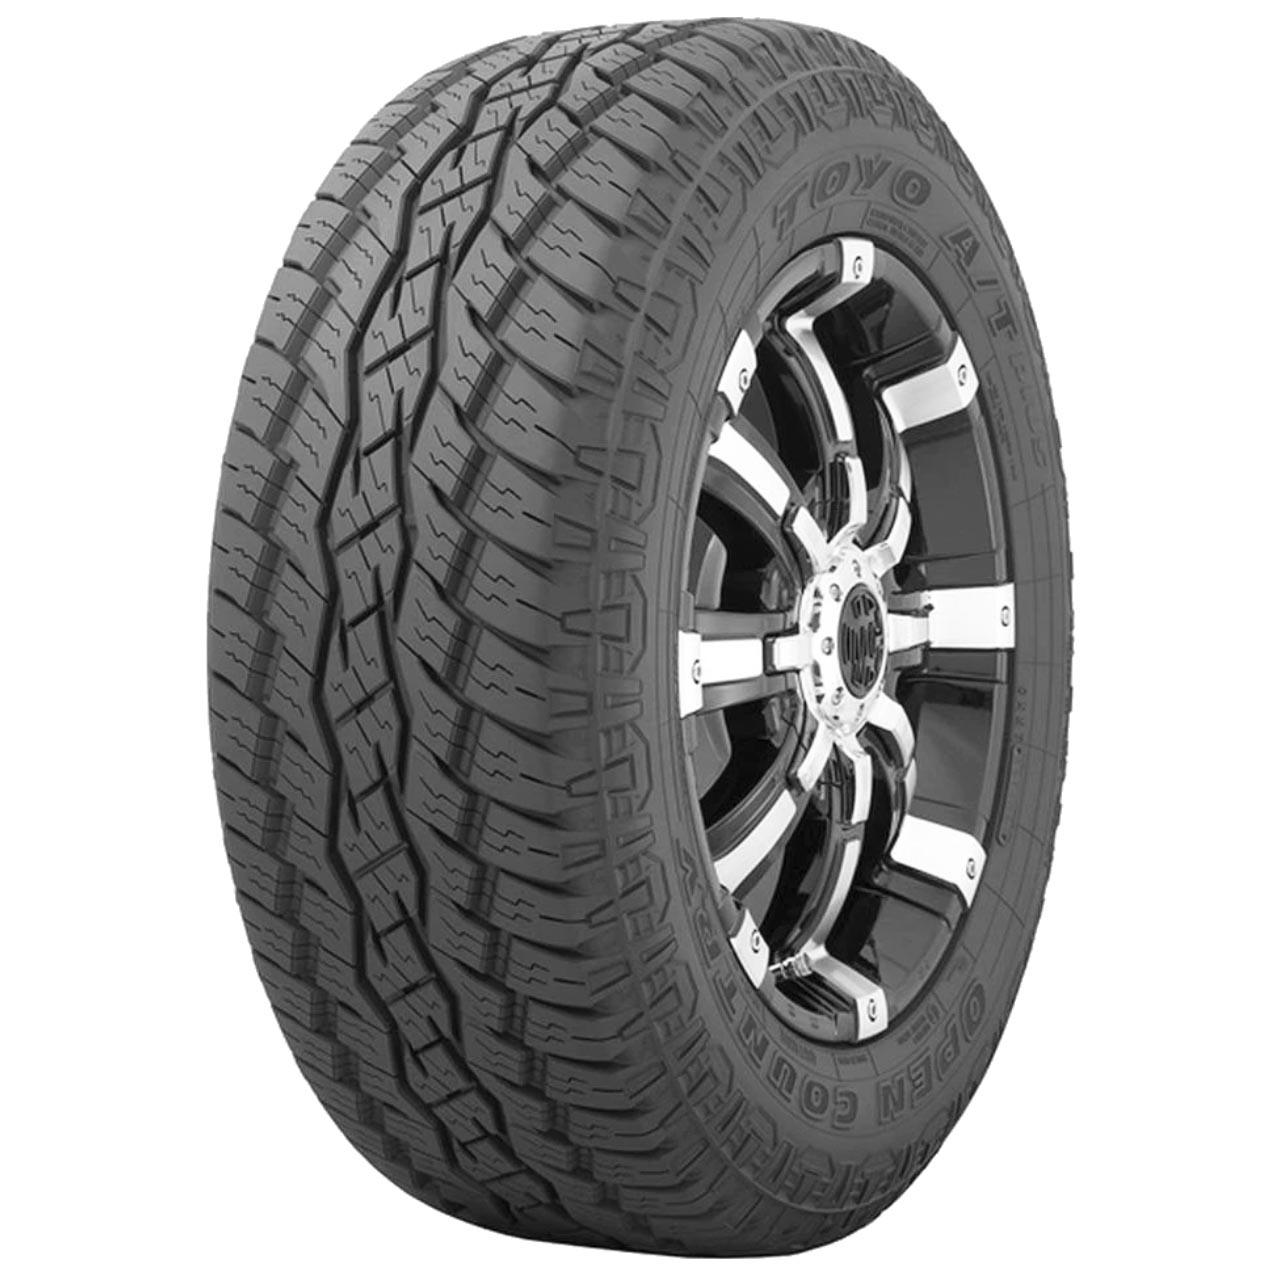 Toyo Open Country AT Plus 285/70R17C 121/118S